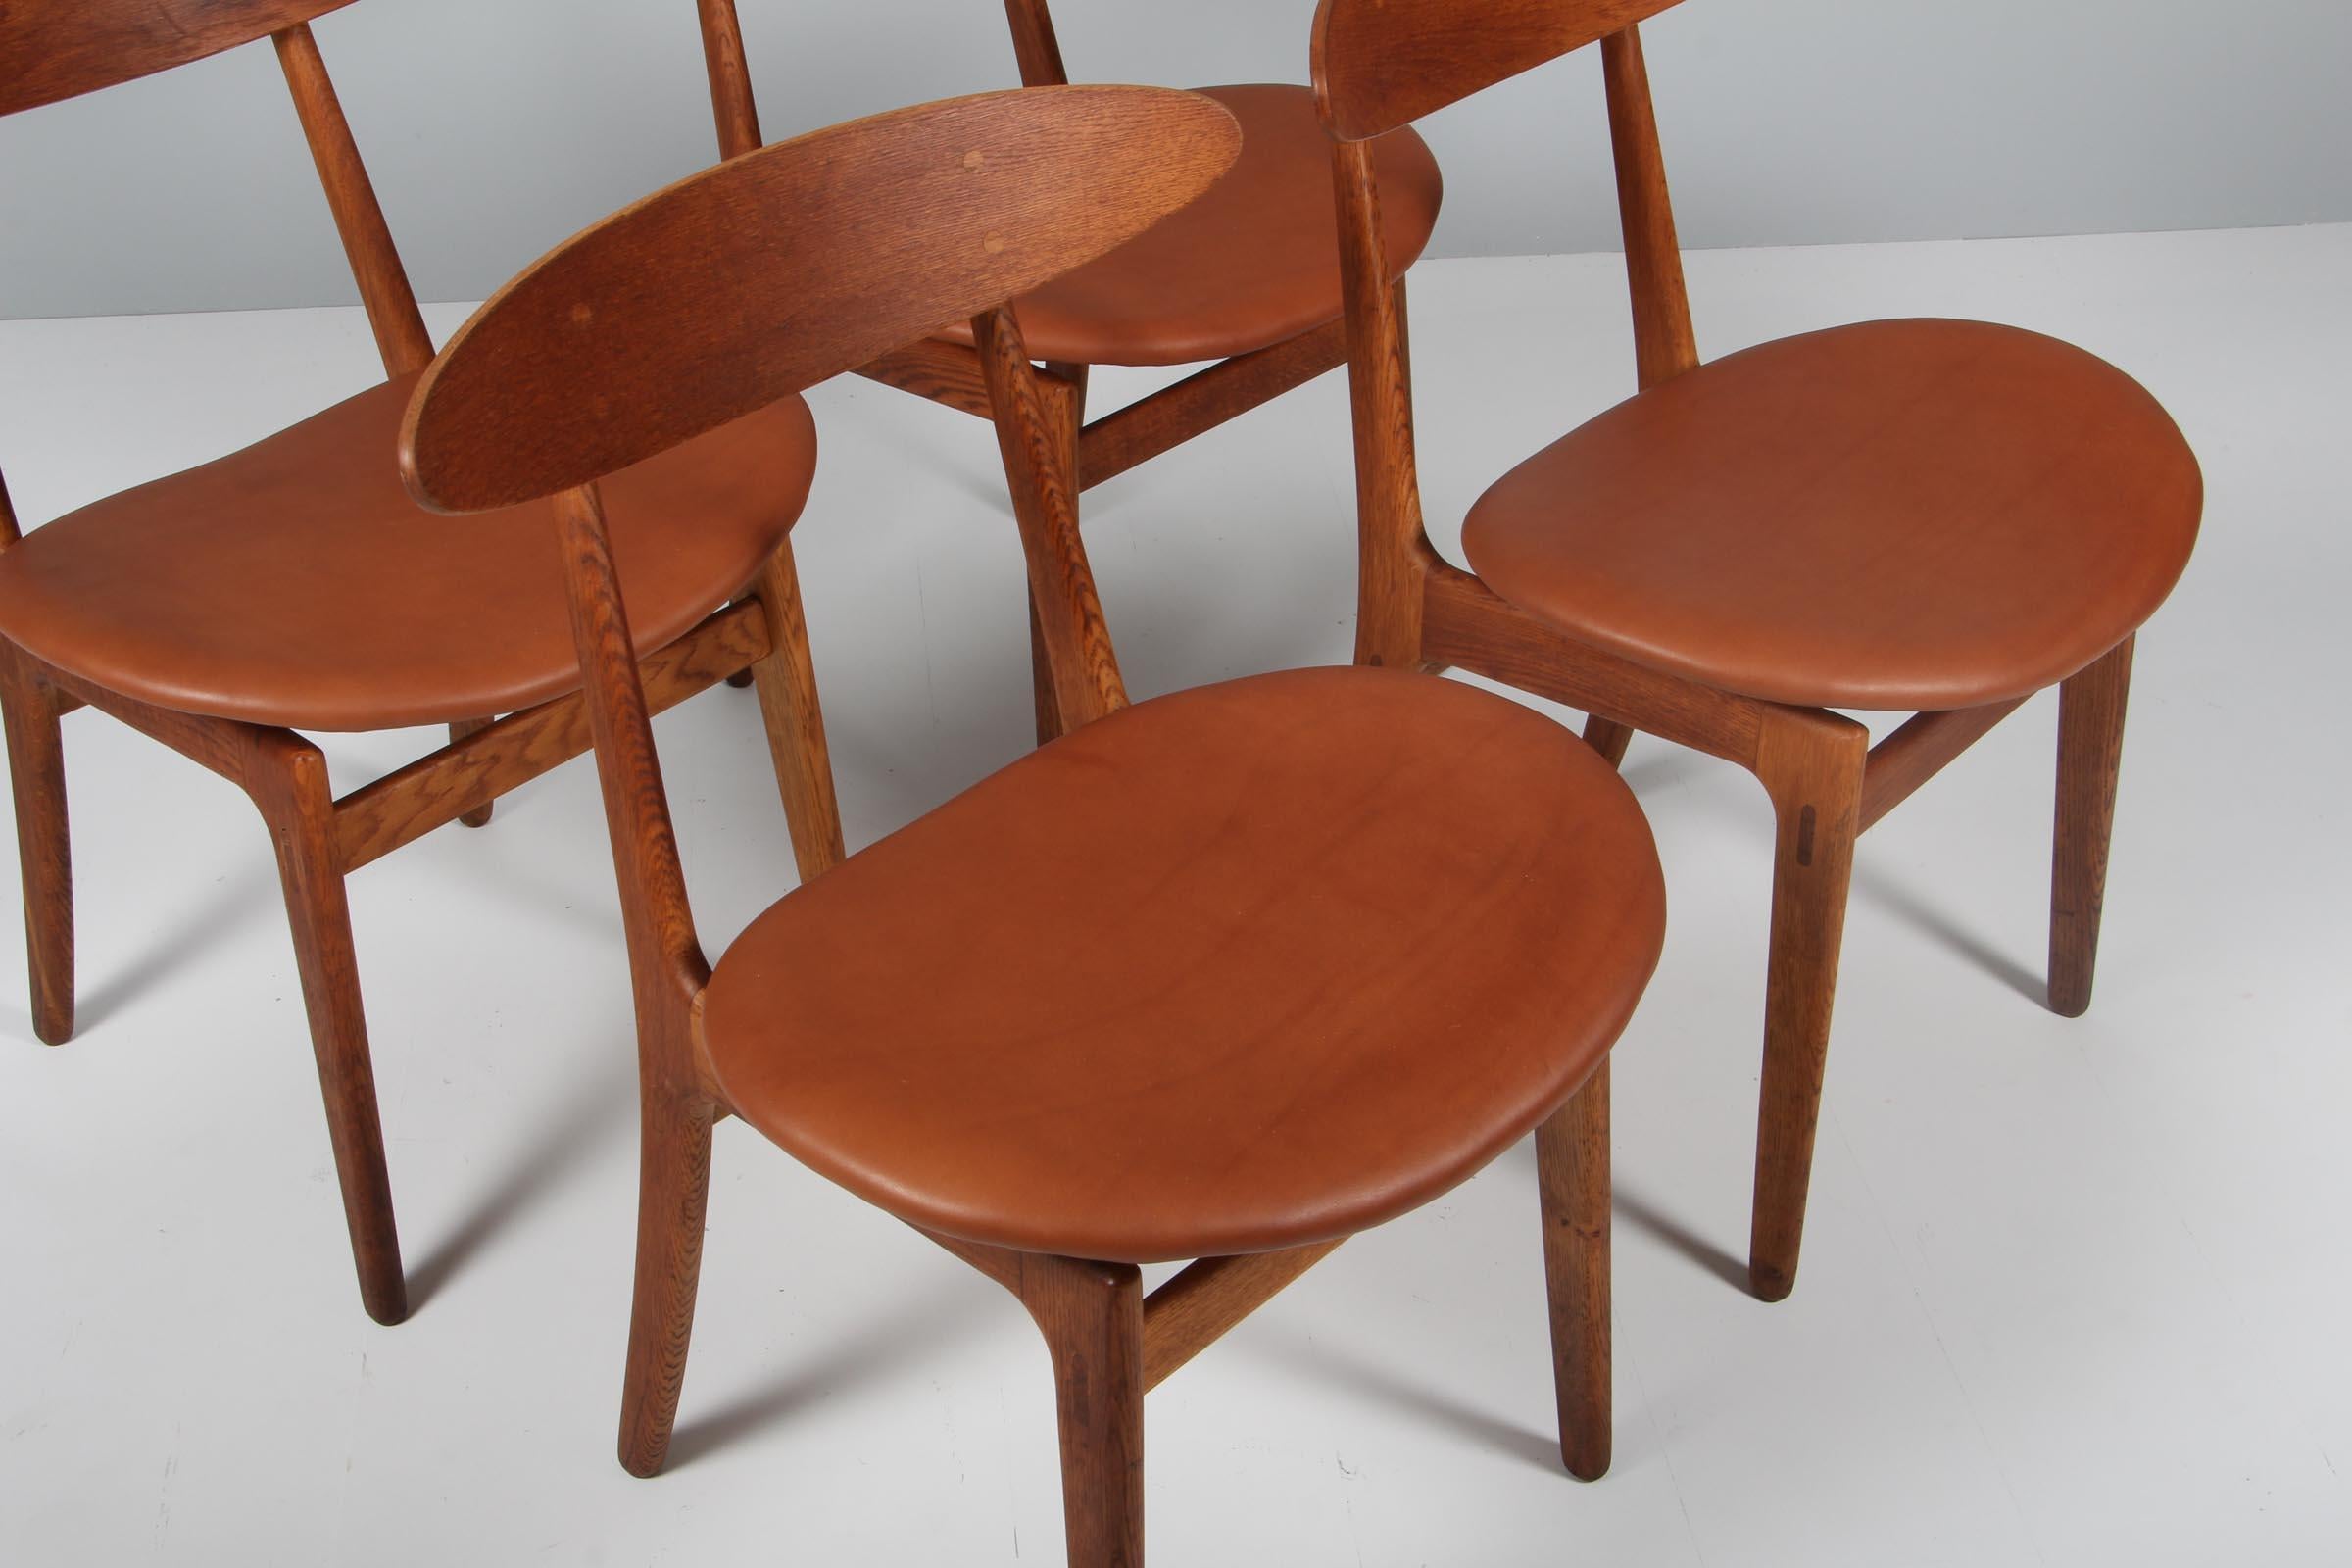 Danish Vilhelm Wohlert Dining Chairs in Oak and Aniline Leather, Denmark, 1960's For Sale